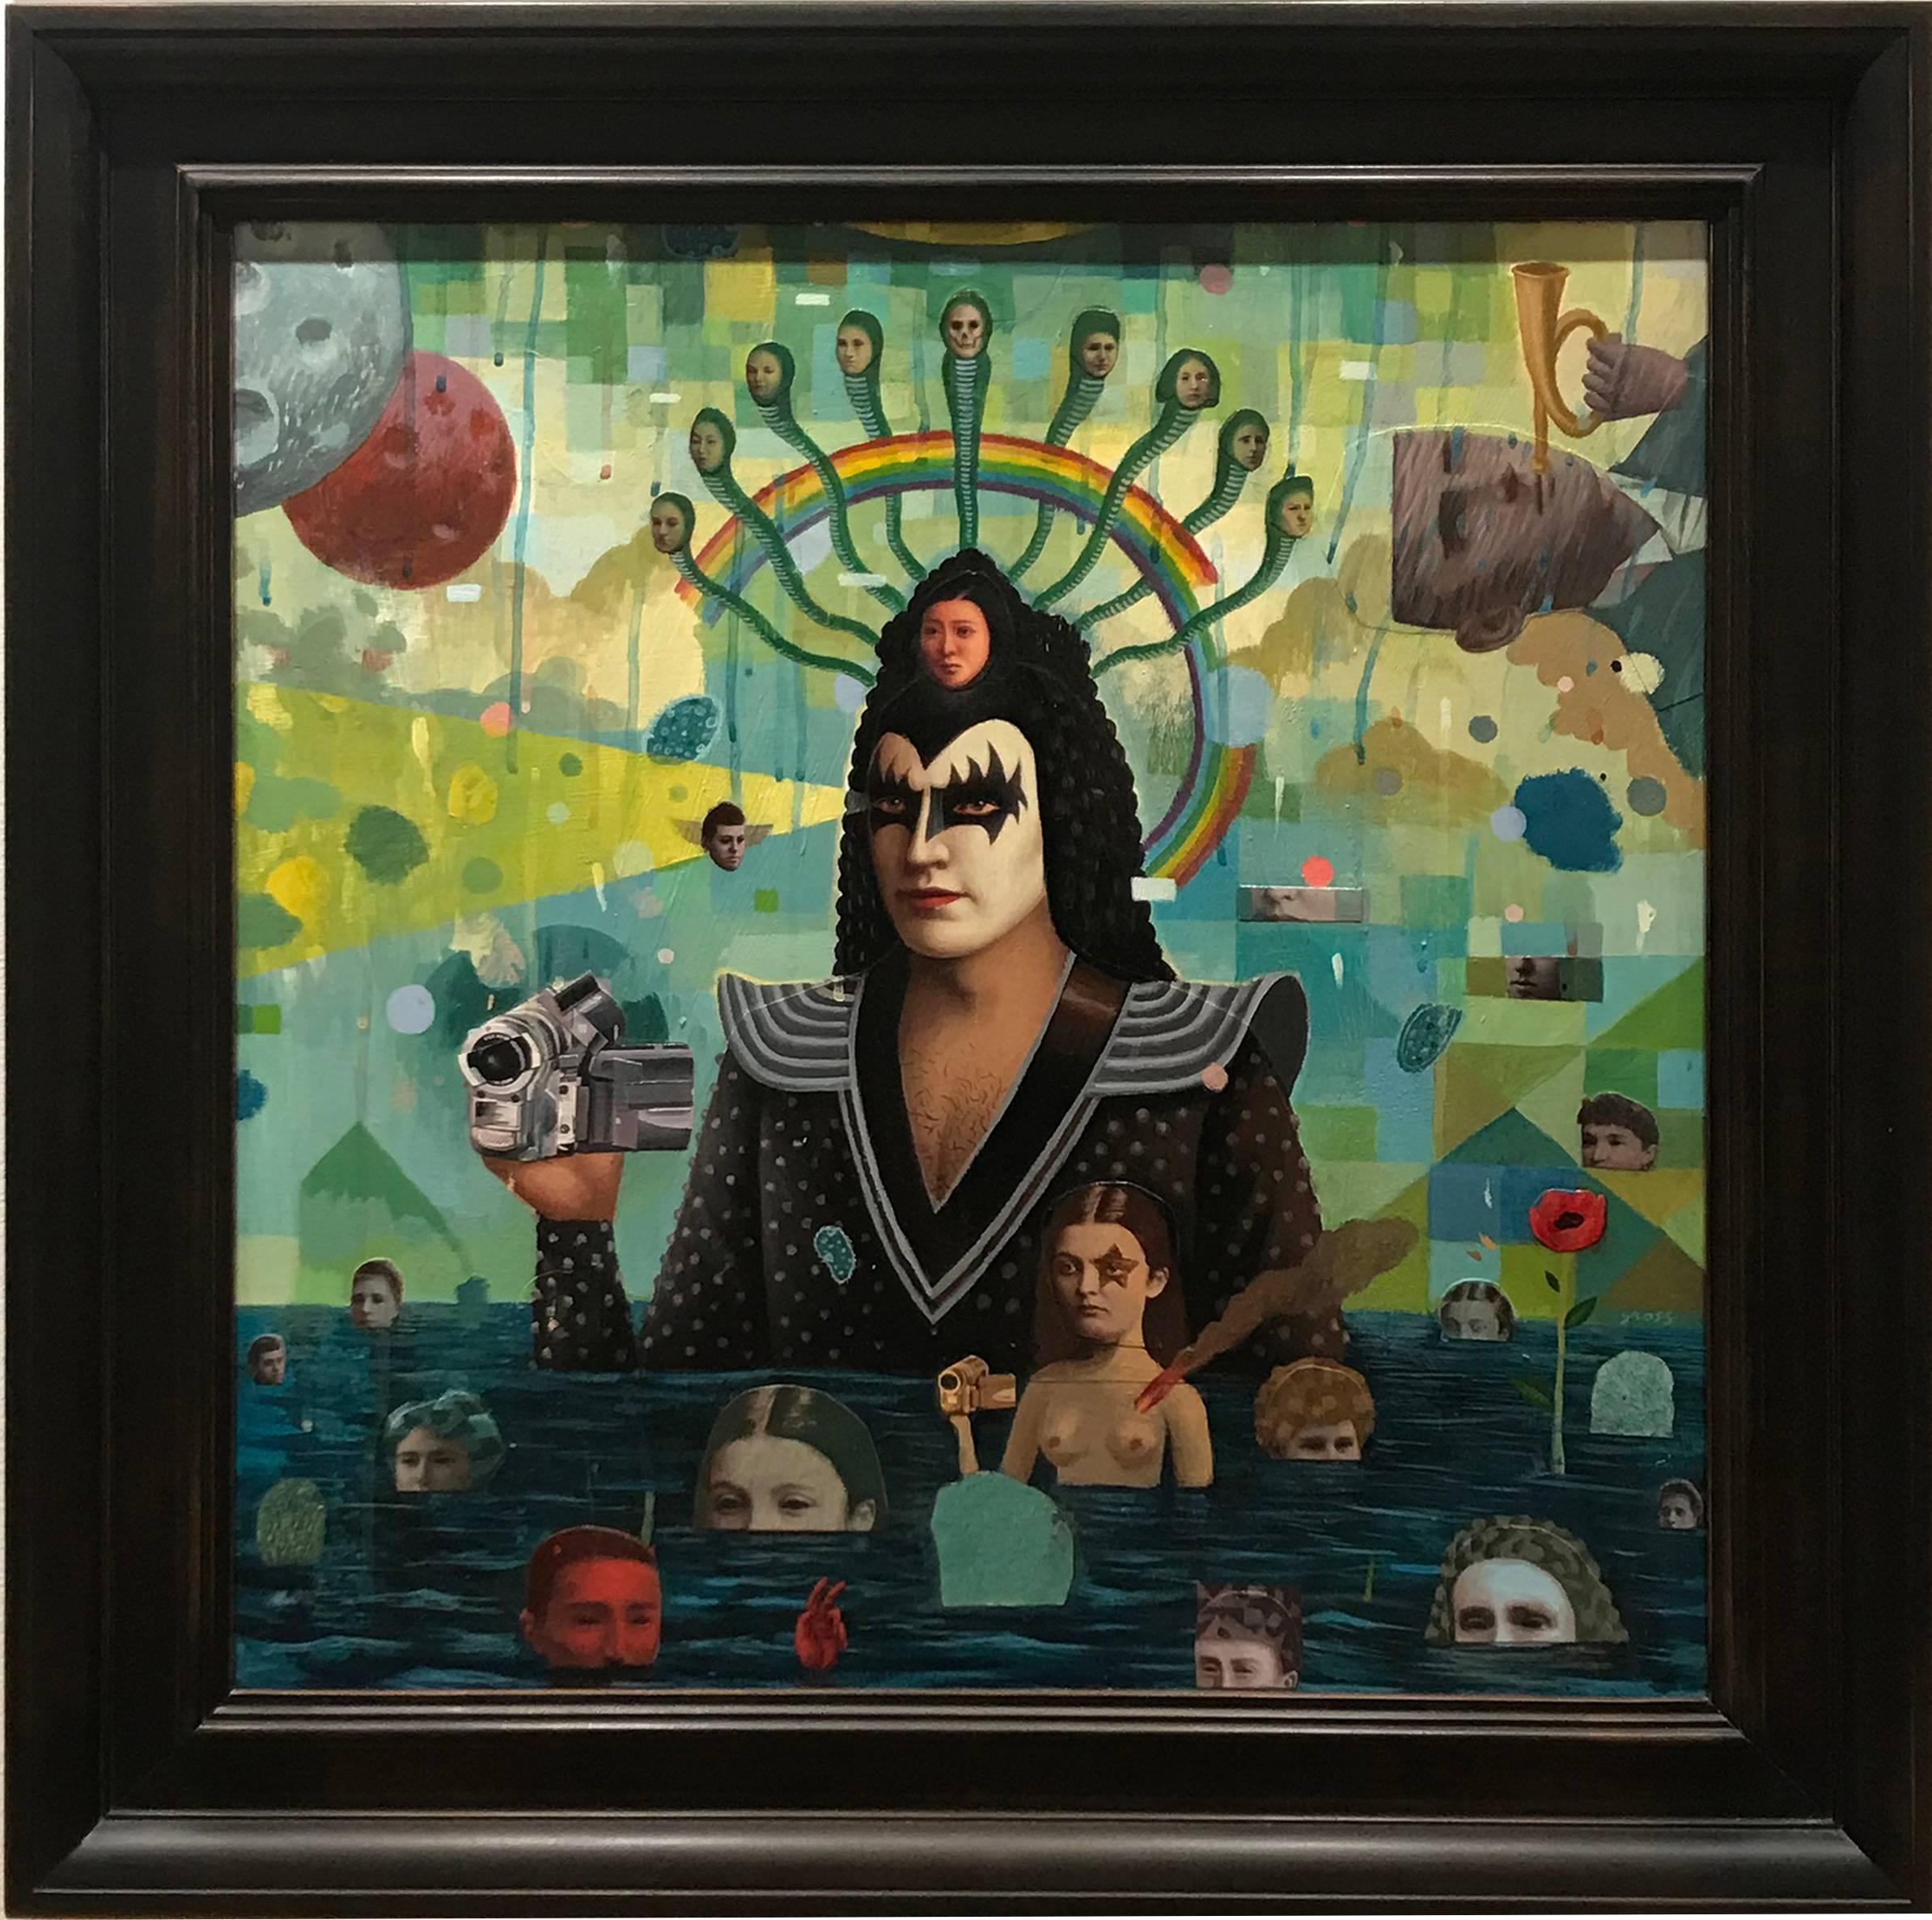 Videotape, 2008
Mixed media oil on panel
24 x 24 
bears Jonathan Levine Gallery, NY label verso
housed in black wood frame

Alex Gross lives in Los Angeles, California. In 1990, he received a BFA with honors from Art Center College of Design in